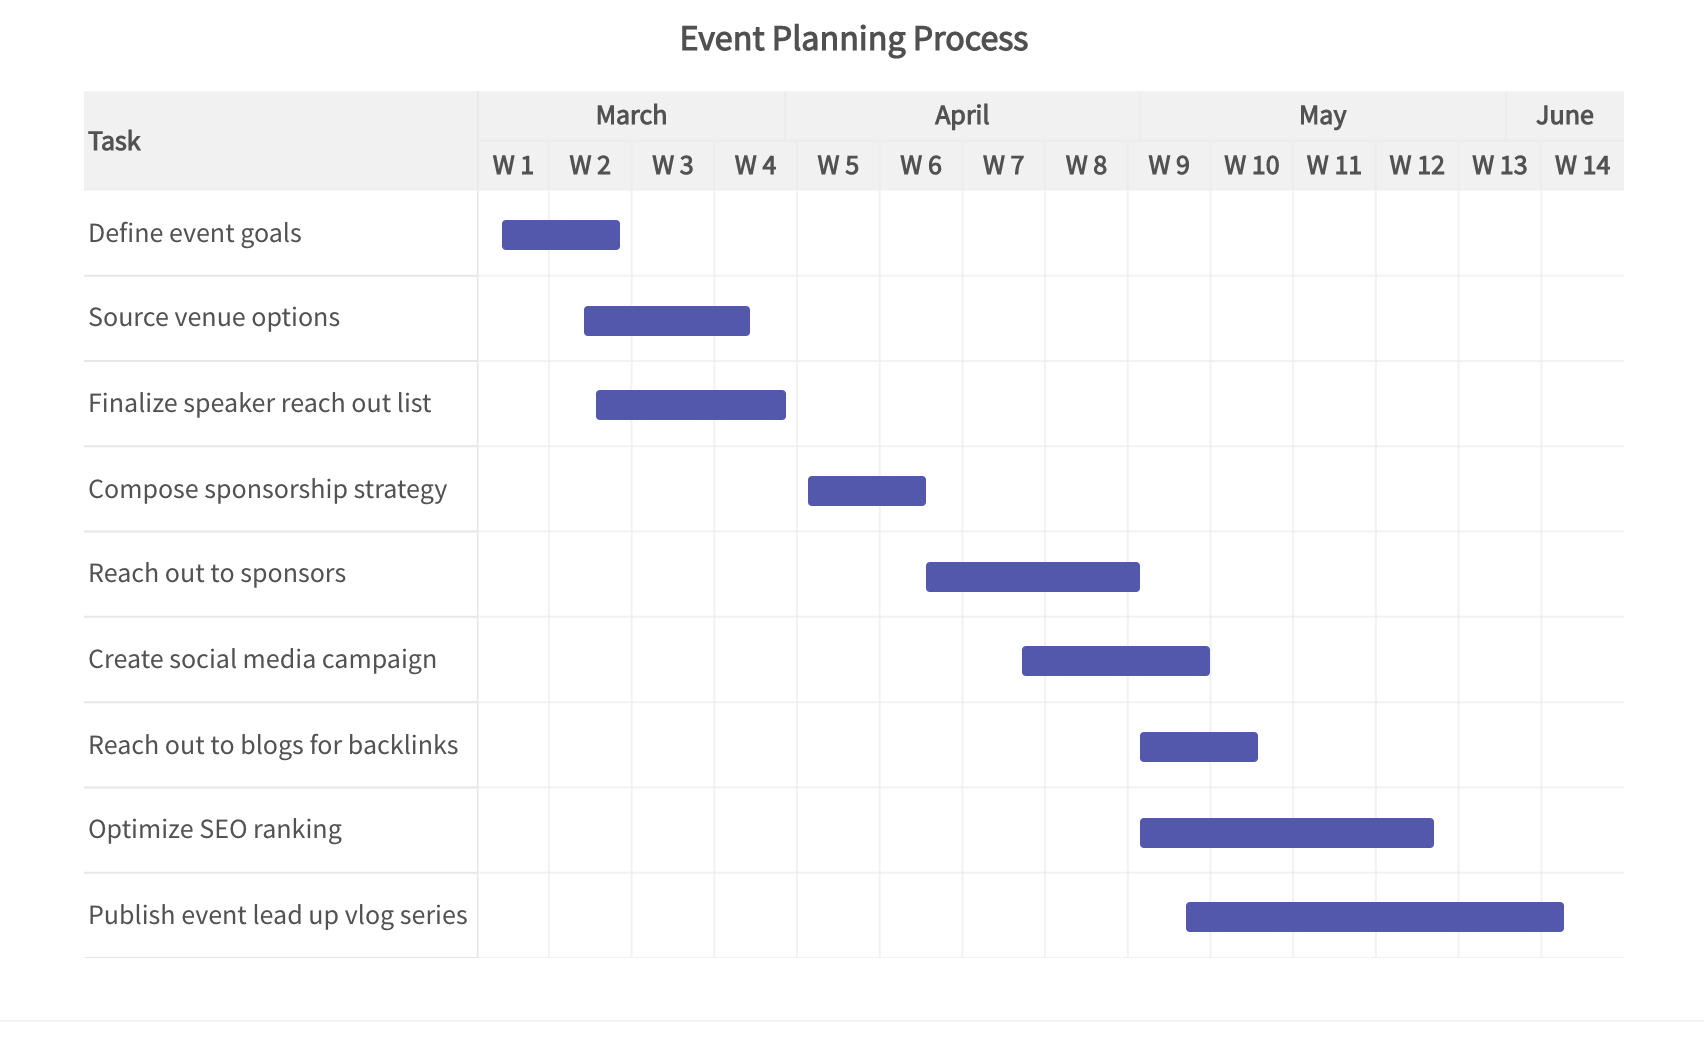 The Gantt chart is used for showcasing timelines.